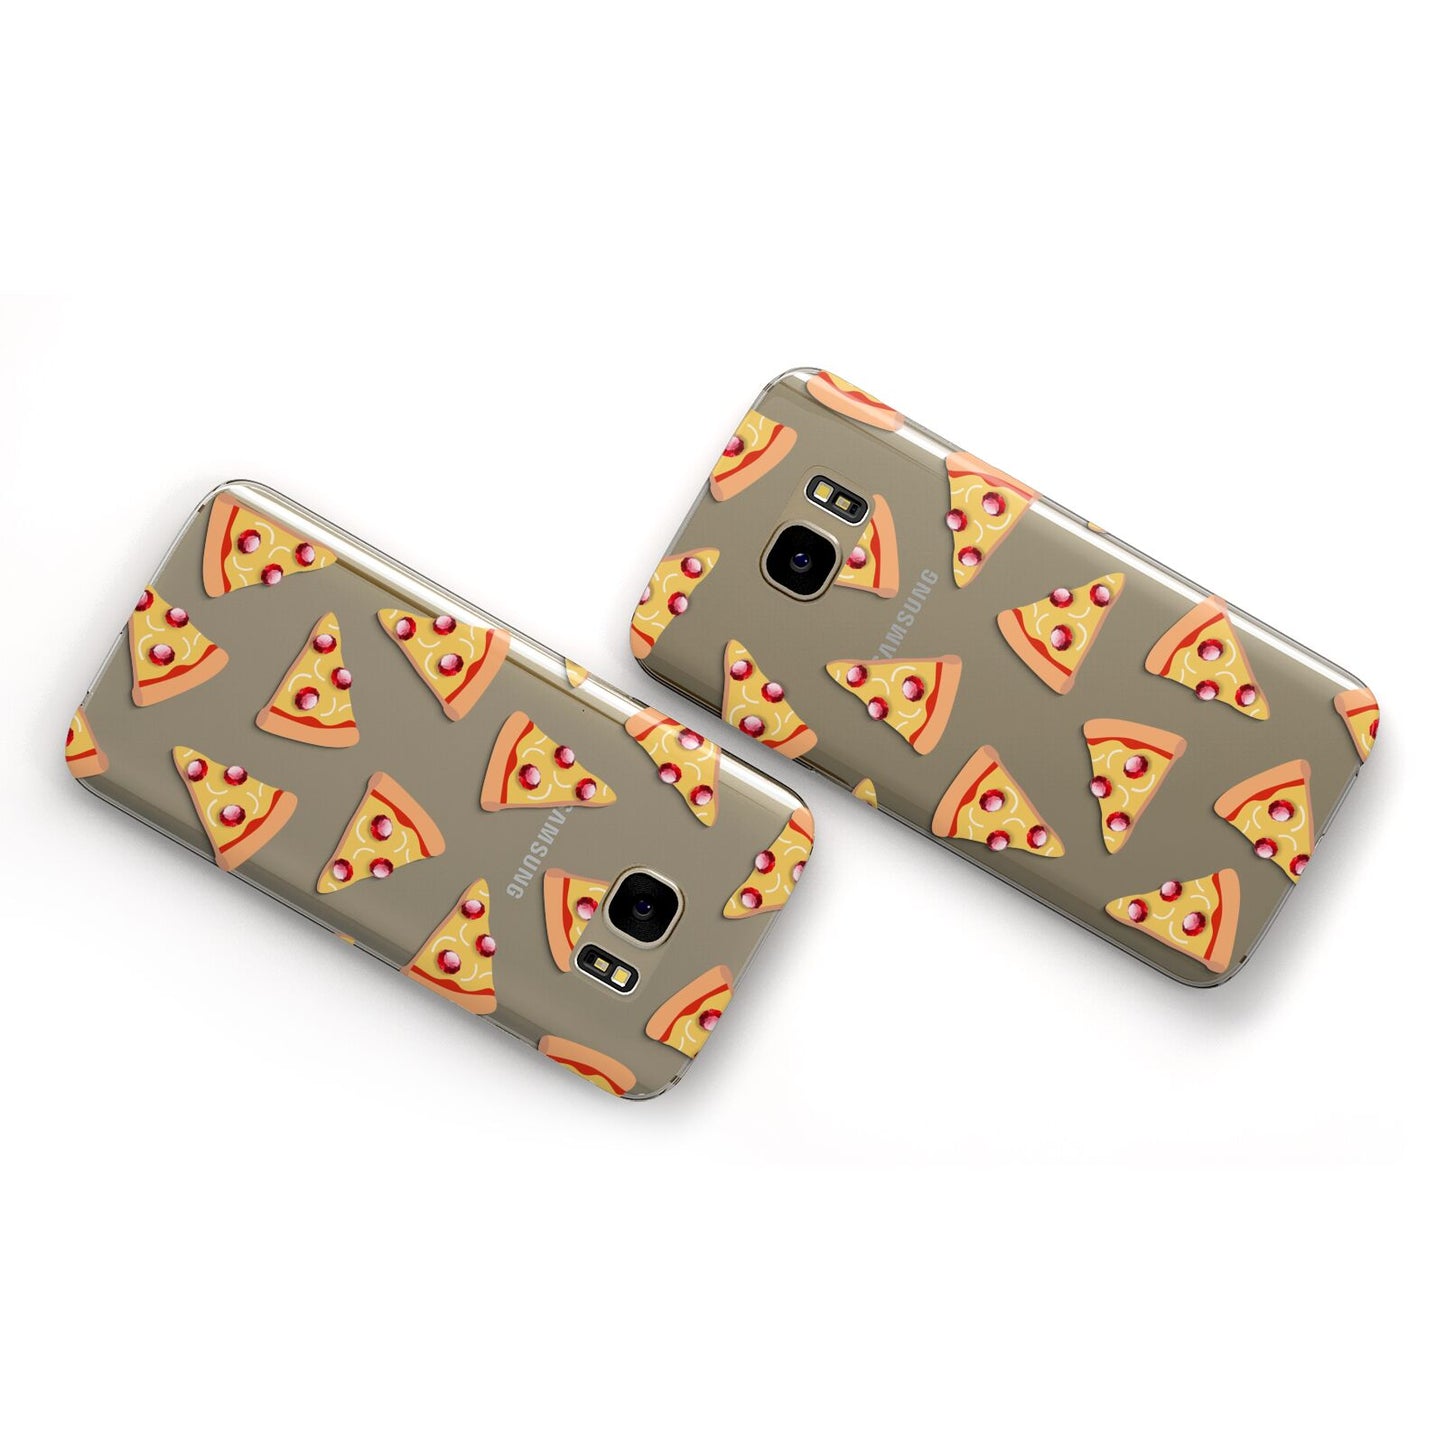 Rubies on Cartoon Pizza Slices Samsung Galaxy Case Flat Overview